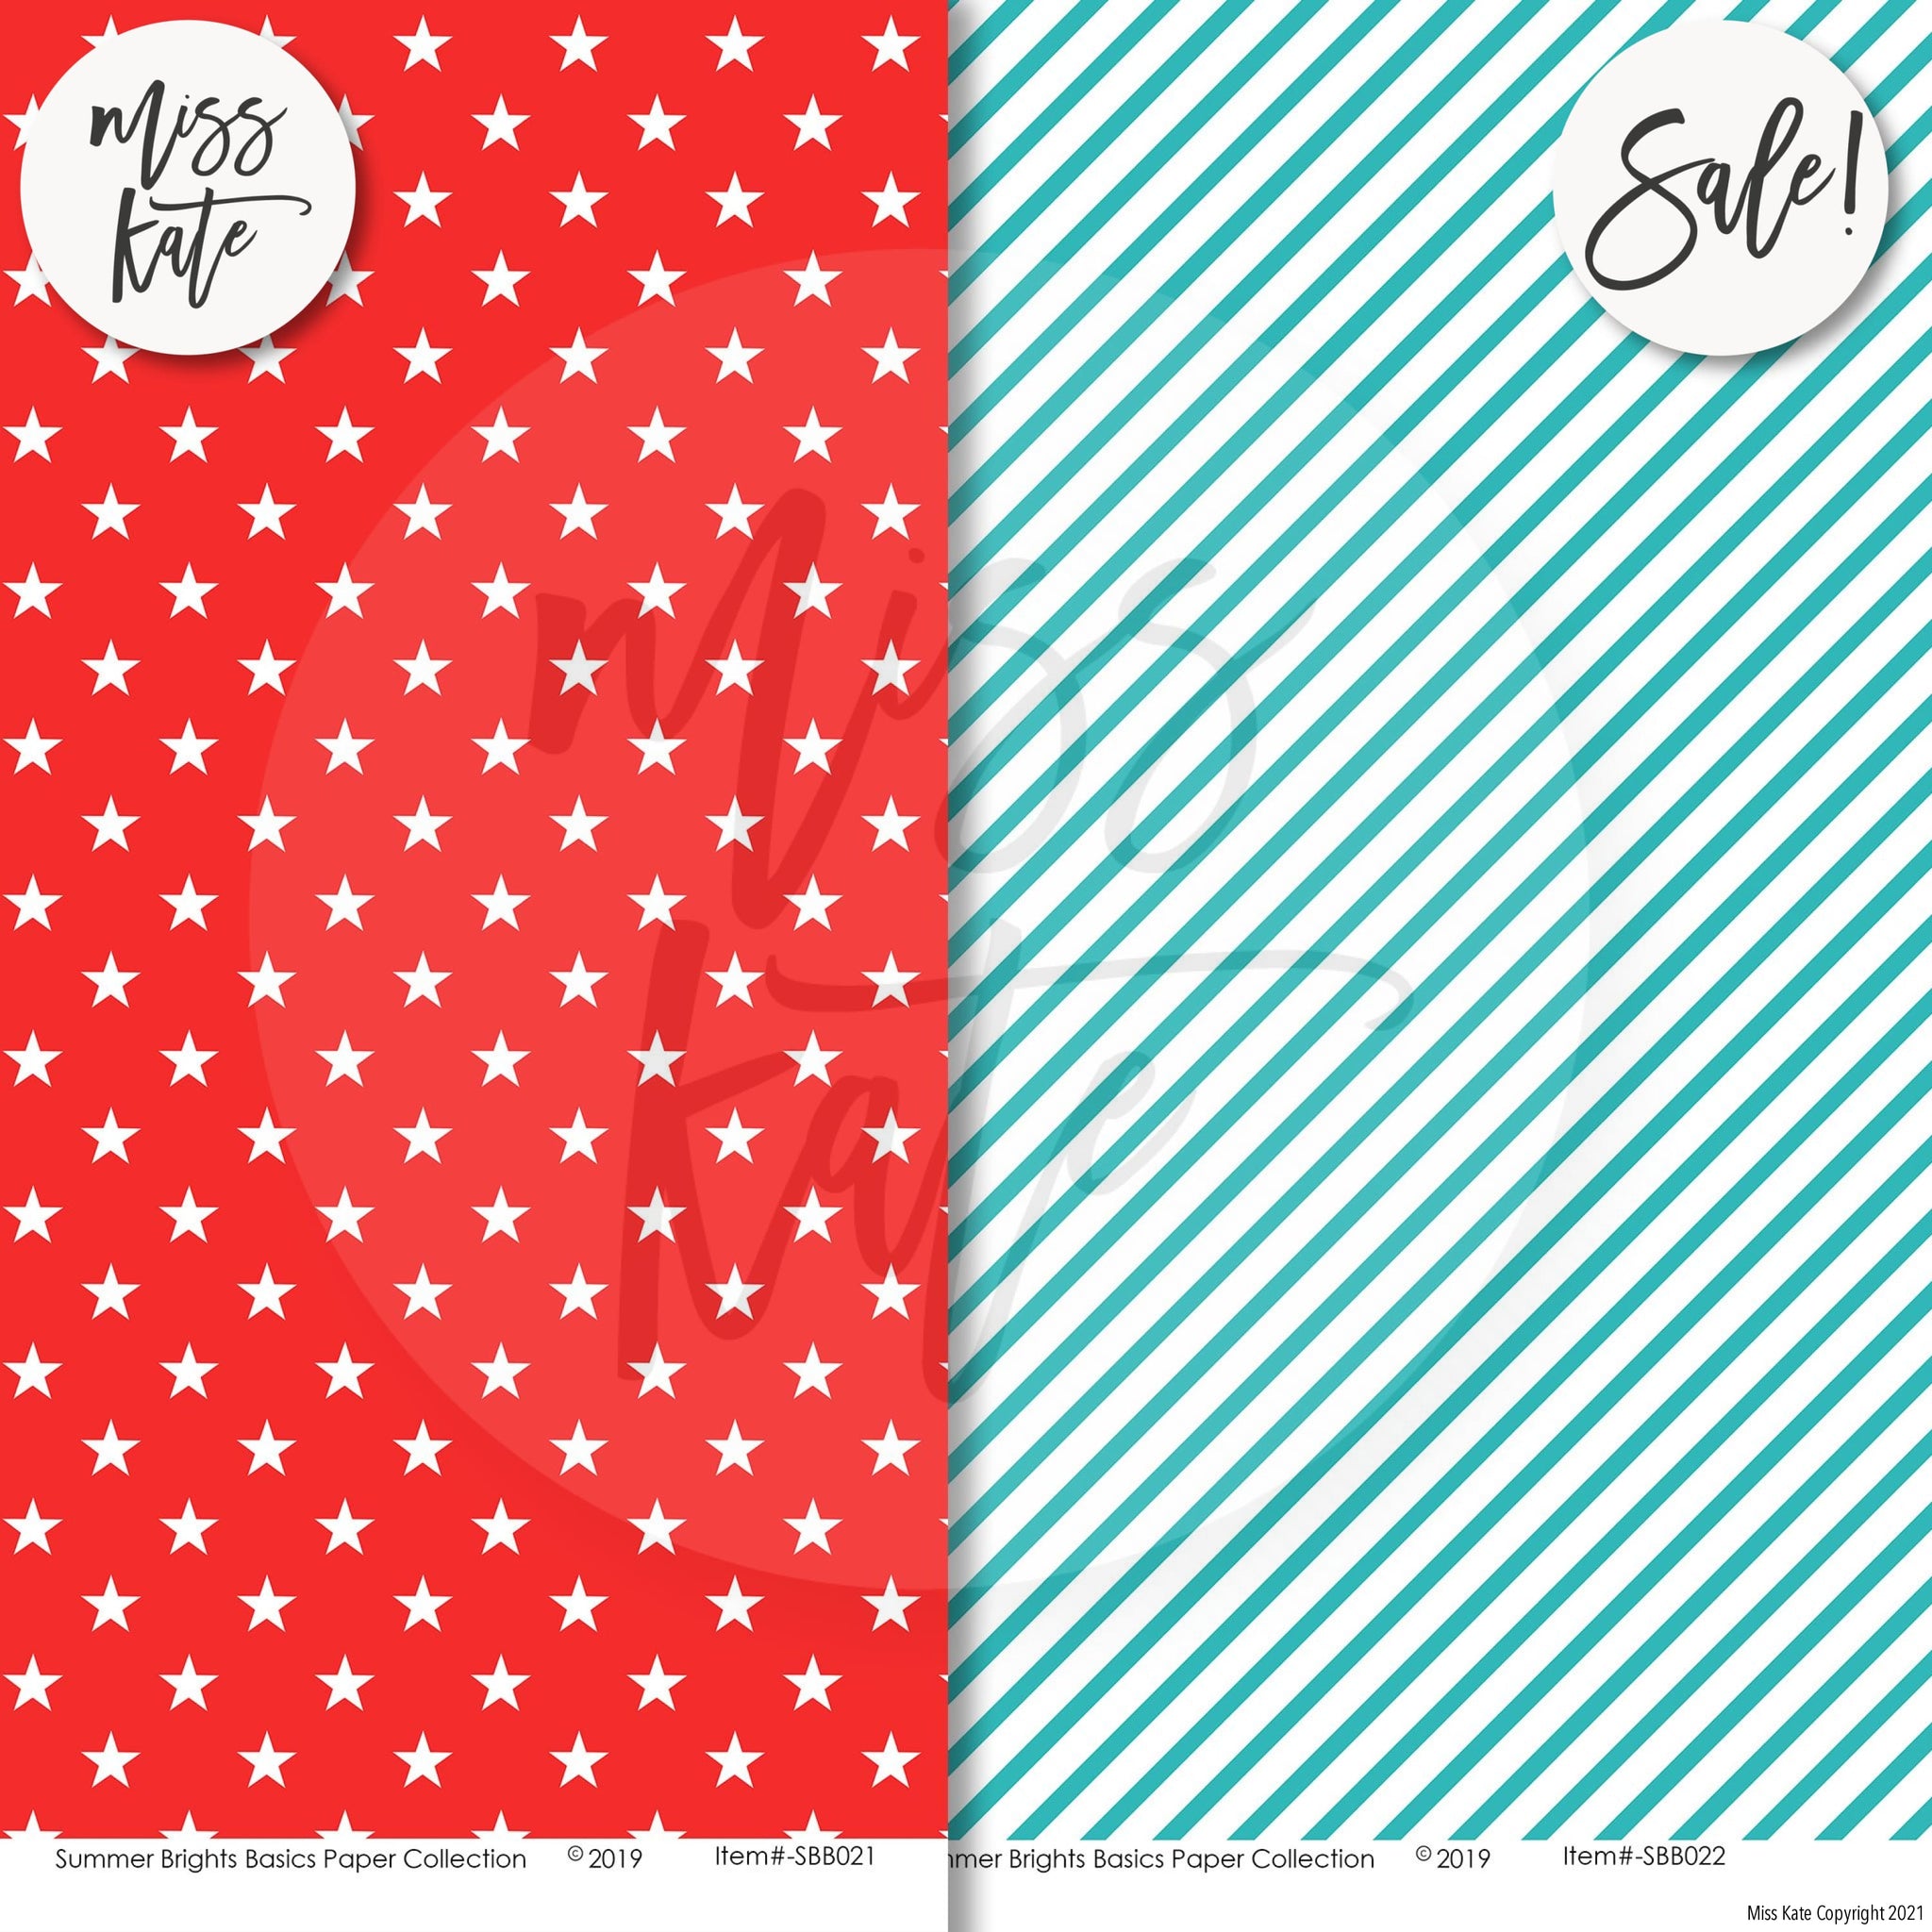 City Scrapbook Paper 8.5 x 11 Inches, 40 Pages: 20 Double Sided Sheets with  10 Designs: Publishing, Scarlett Scrapbook: : Books